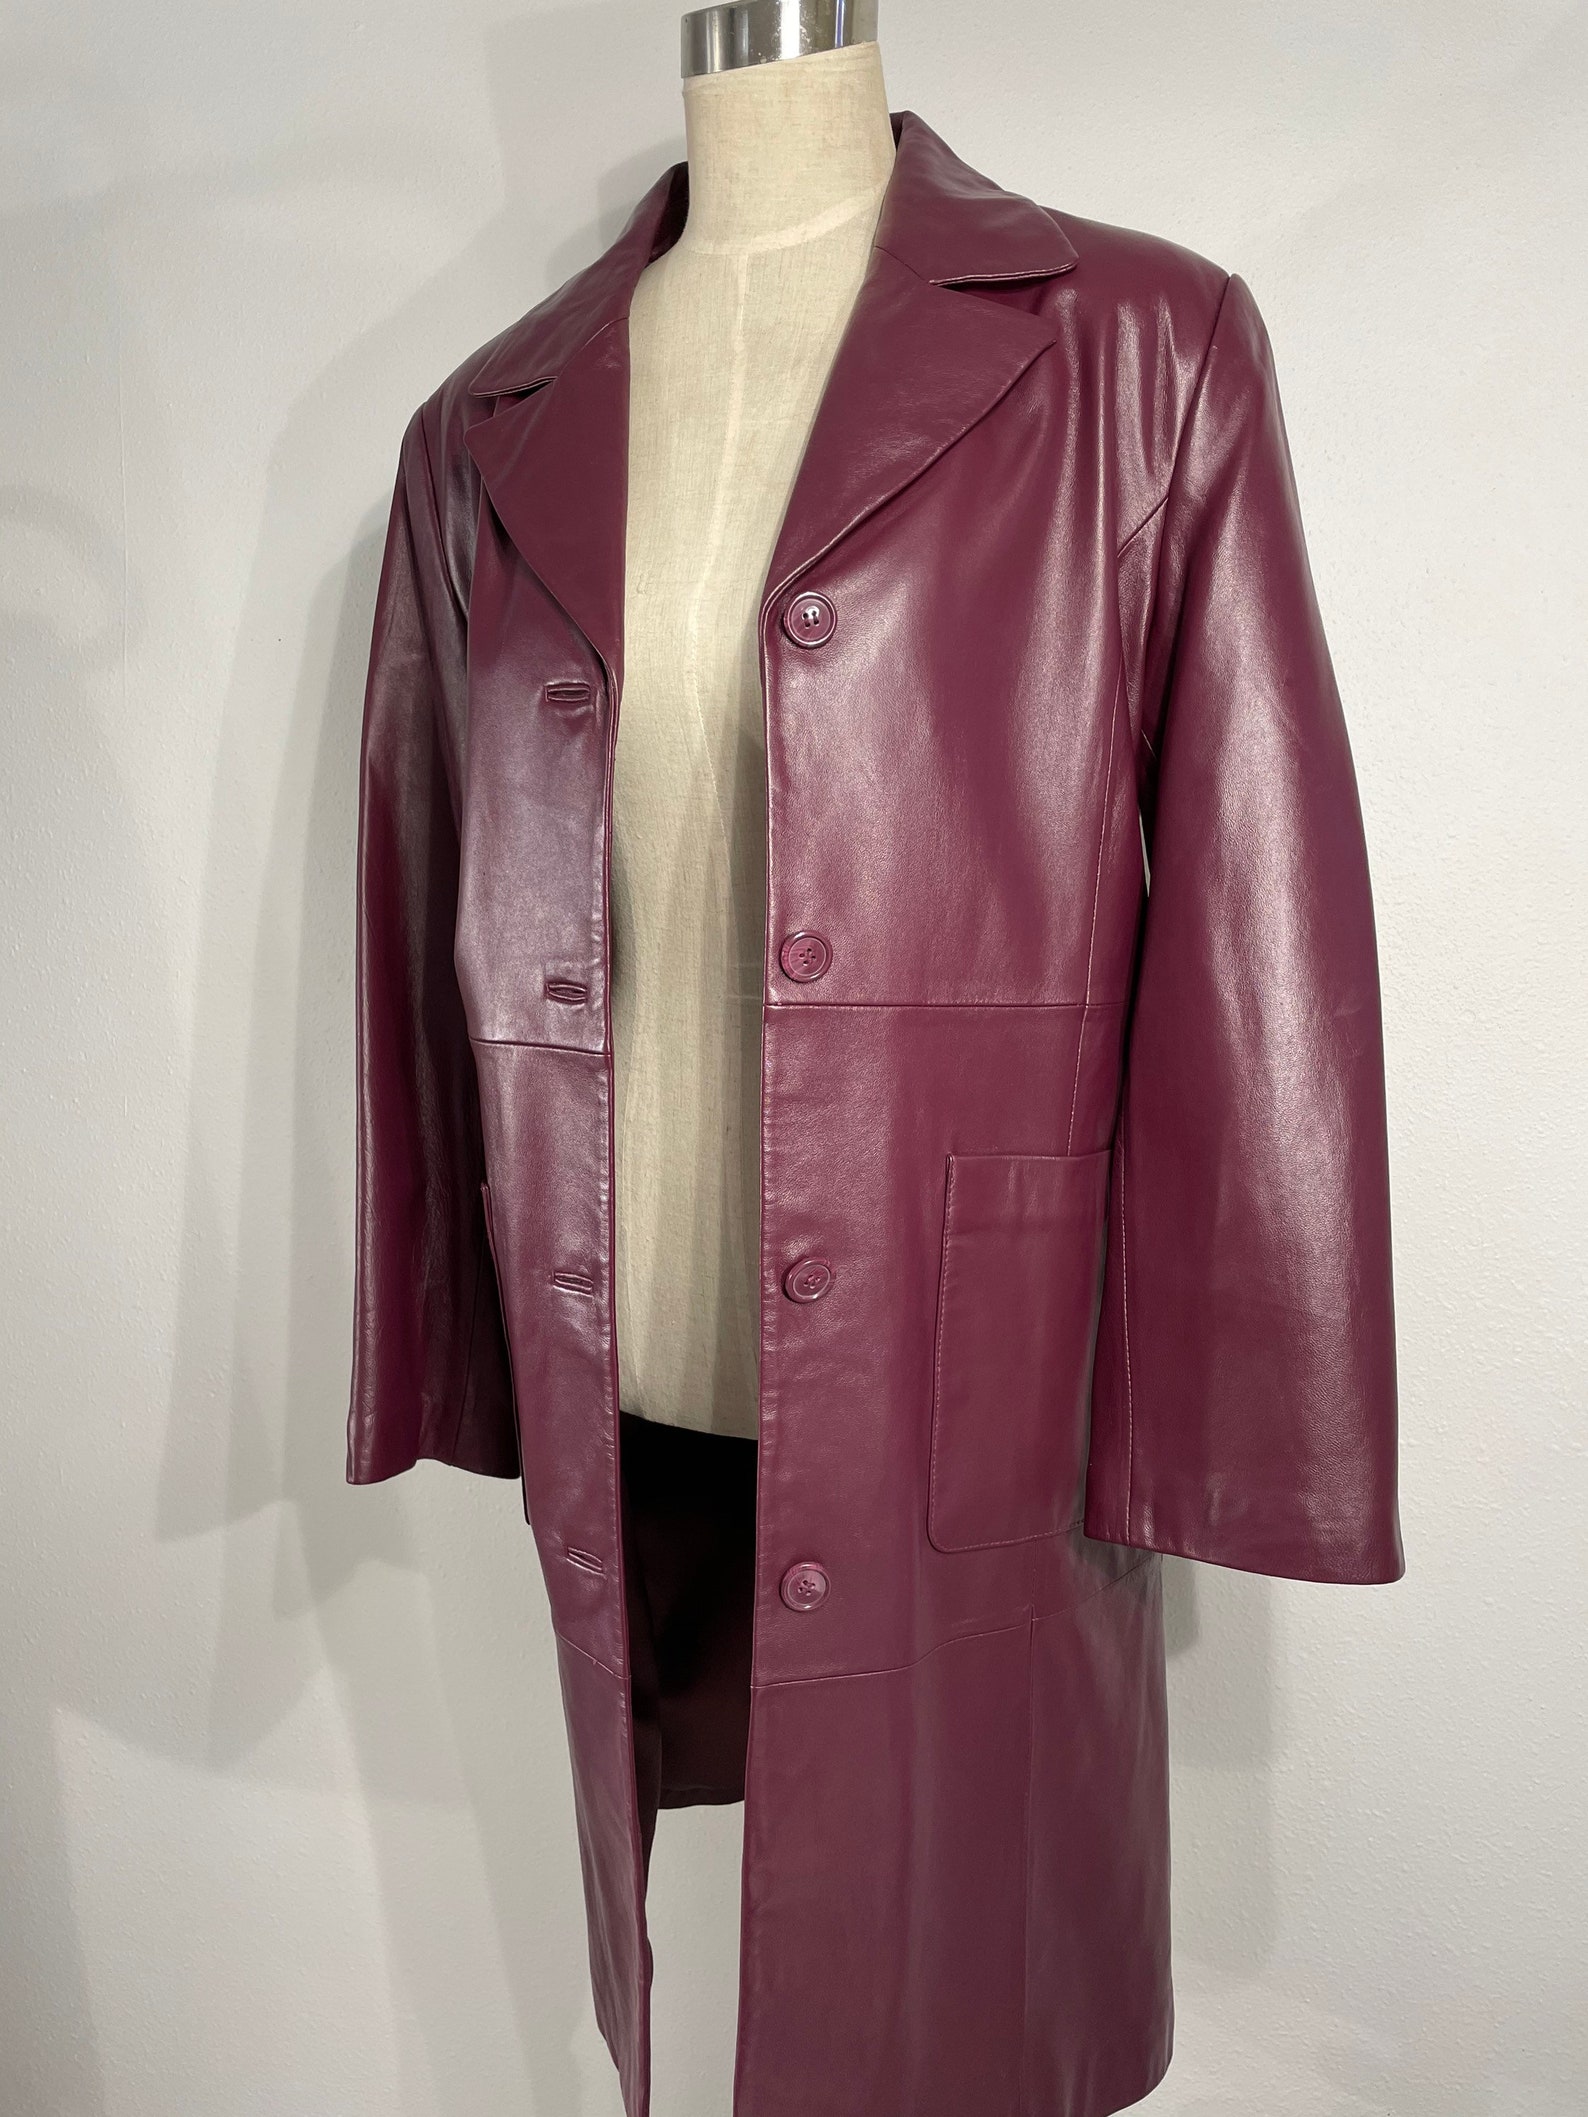 Vintage Terry Lewis purple leather trench | Etsy